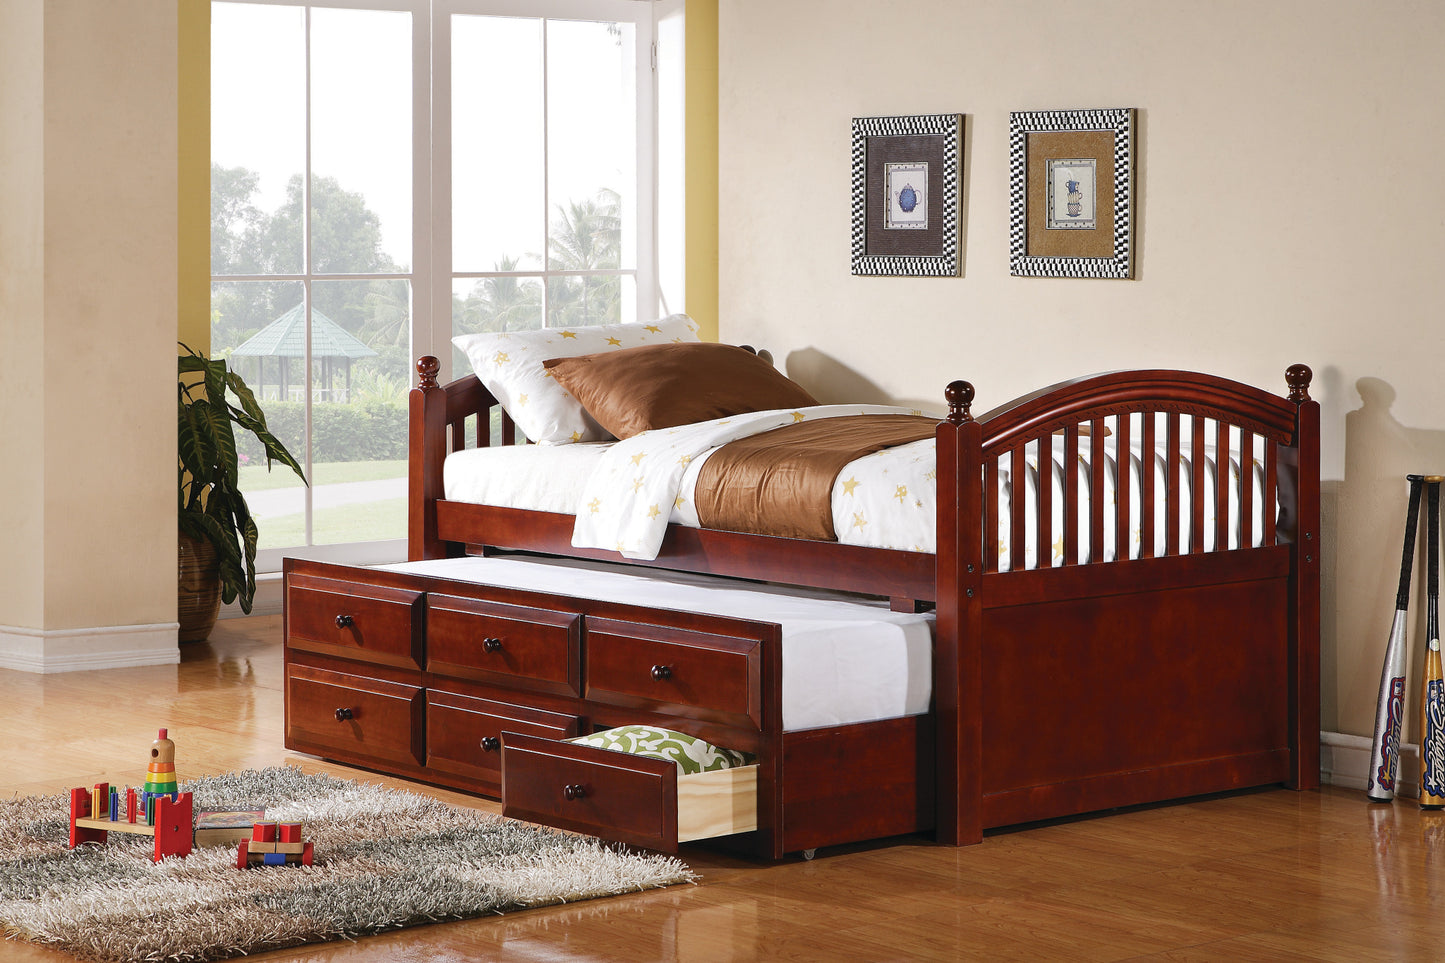 CB5551 - Twin Captain's Bed with Trundle